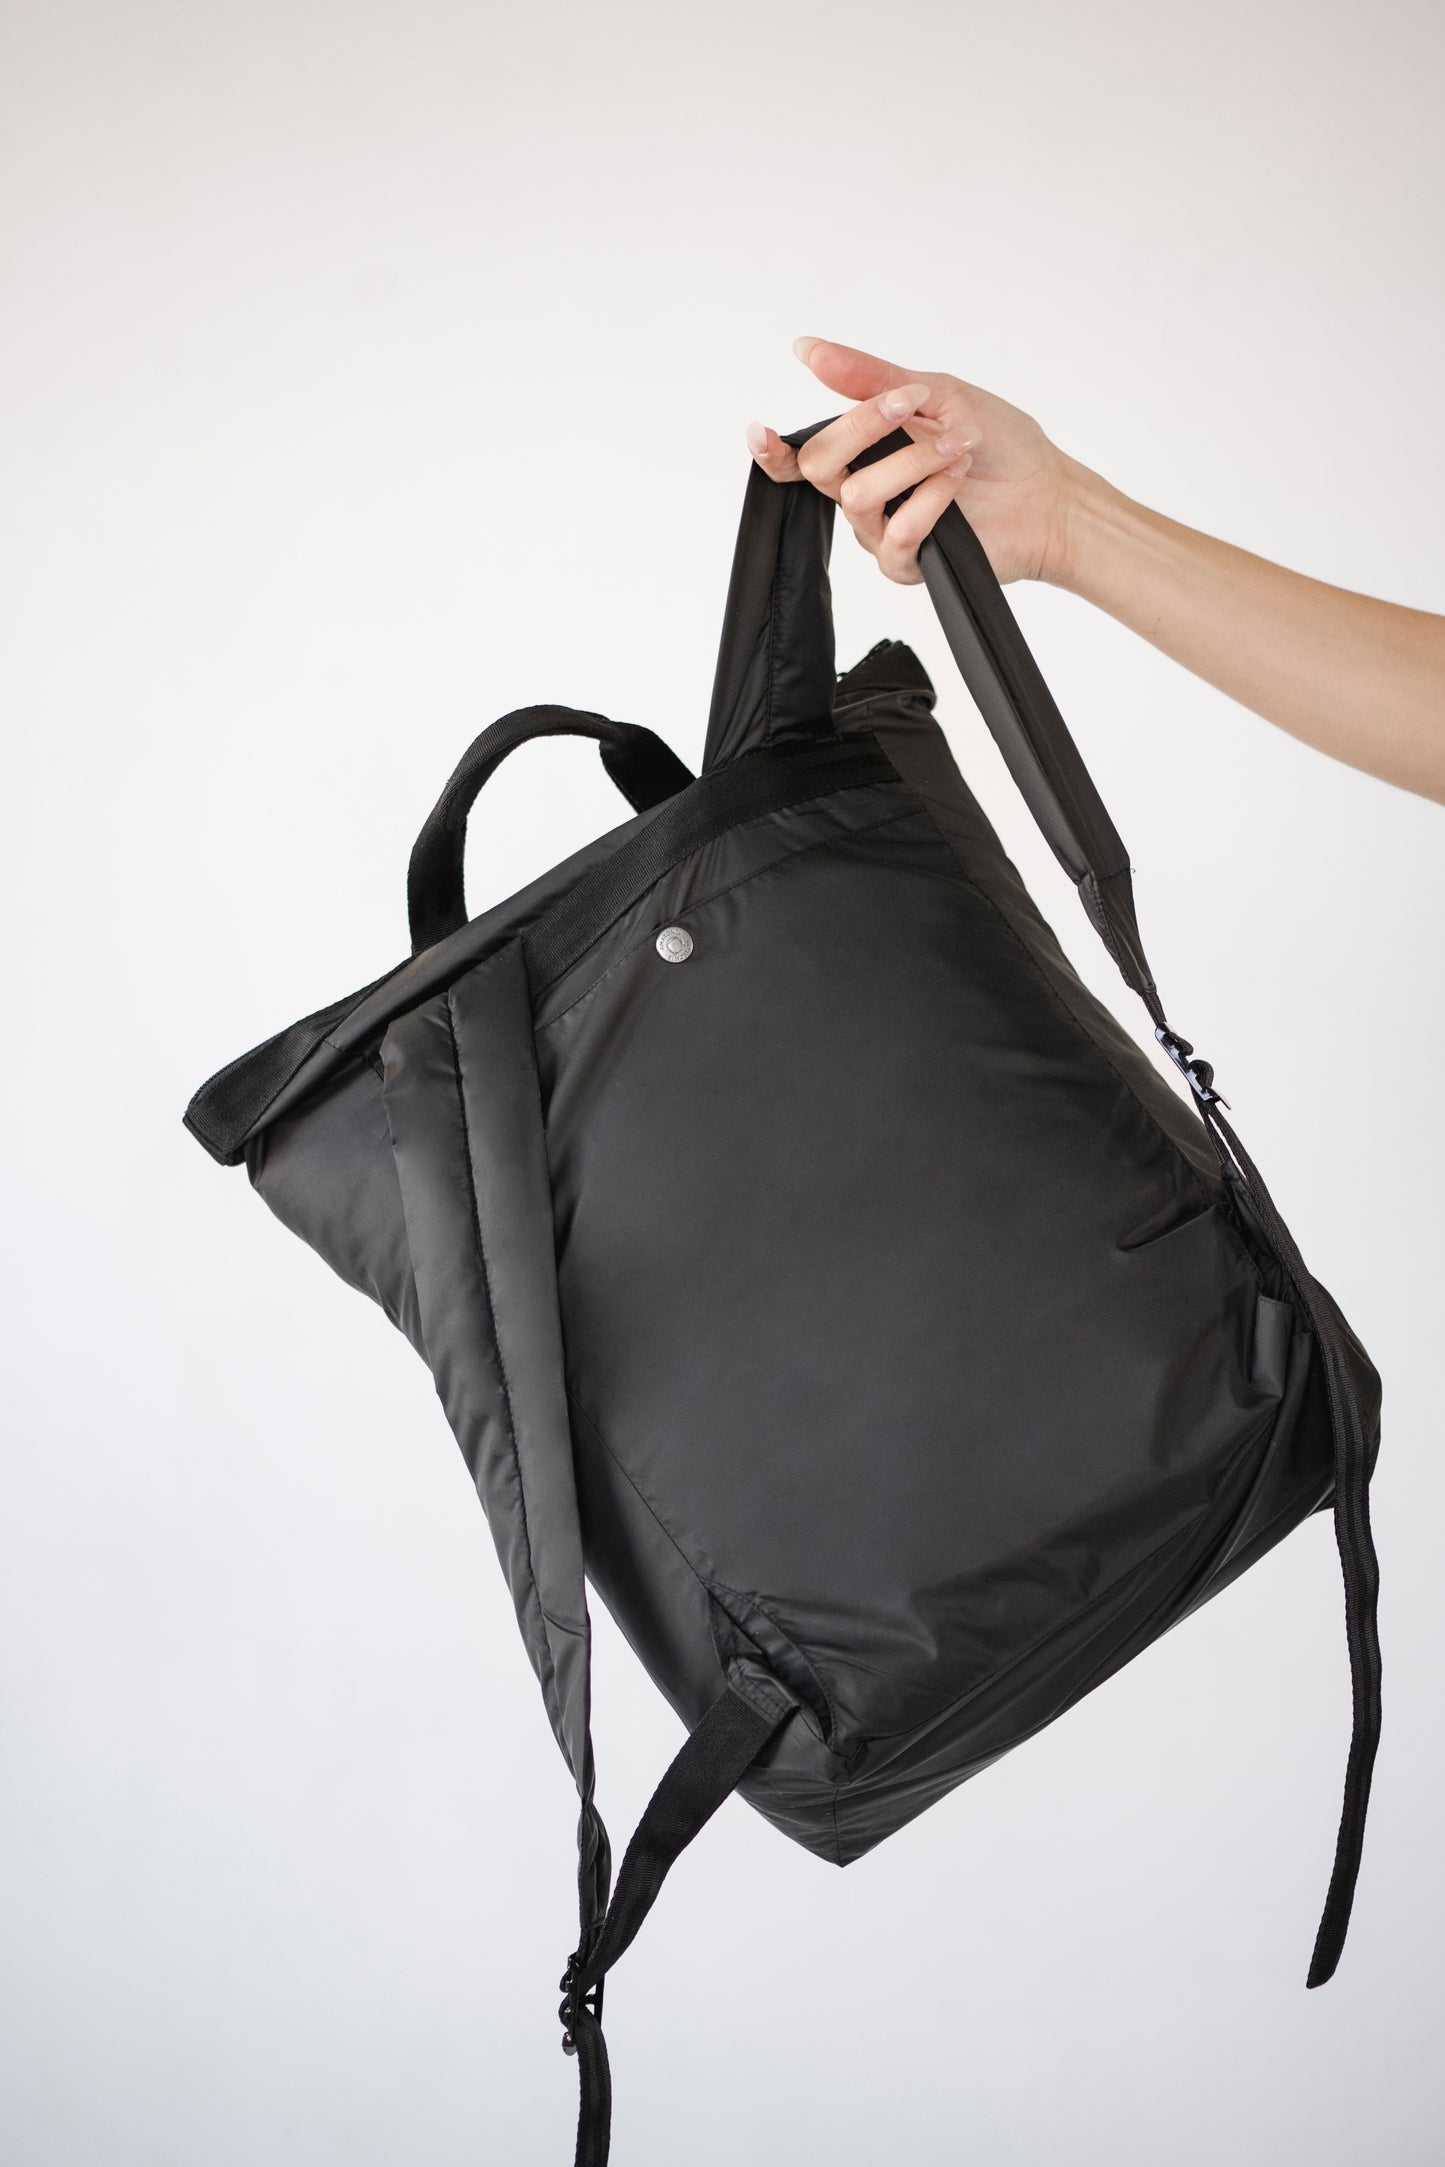 Unicoin Backpack by Anatomie